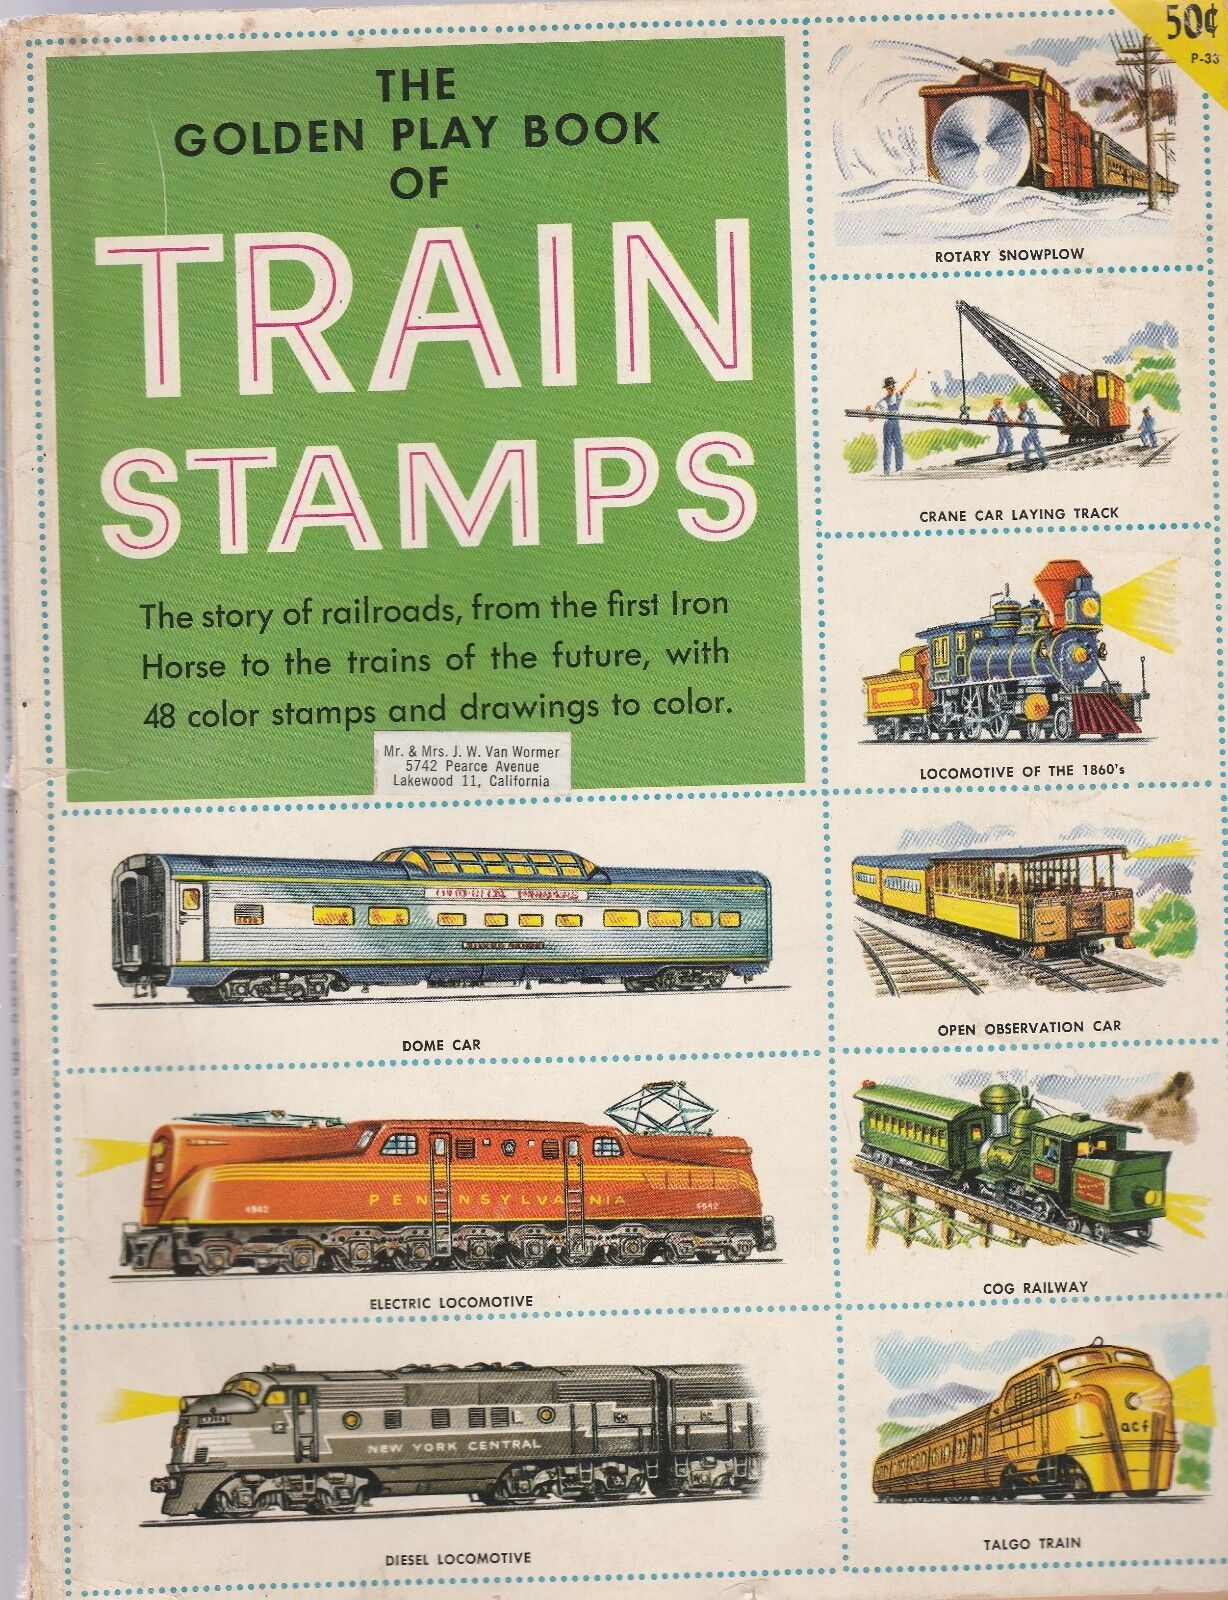 THE 1955 GOLDEN PLAYBOOK OF TRAIN STAMPS(ALL 48) IN THE ALBUM